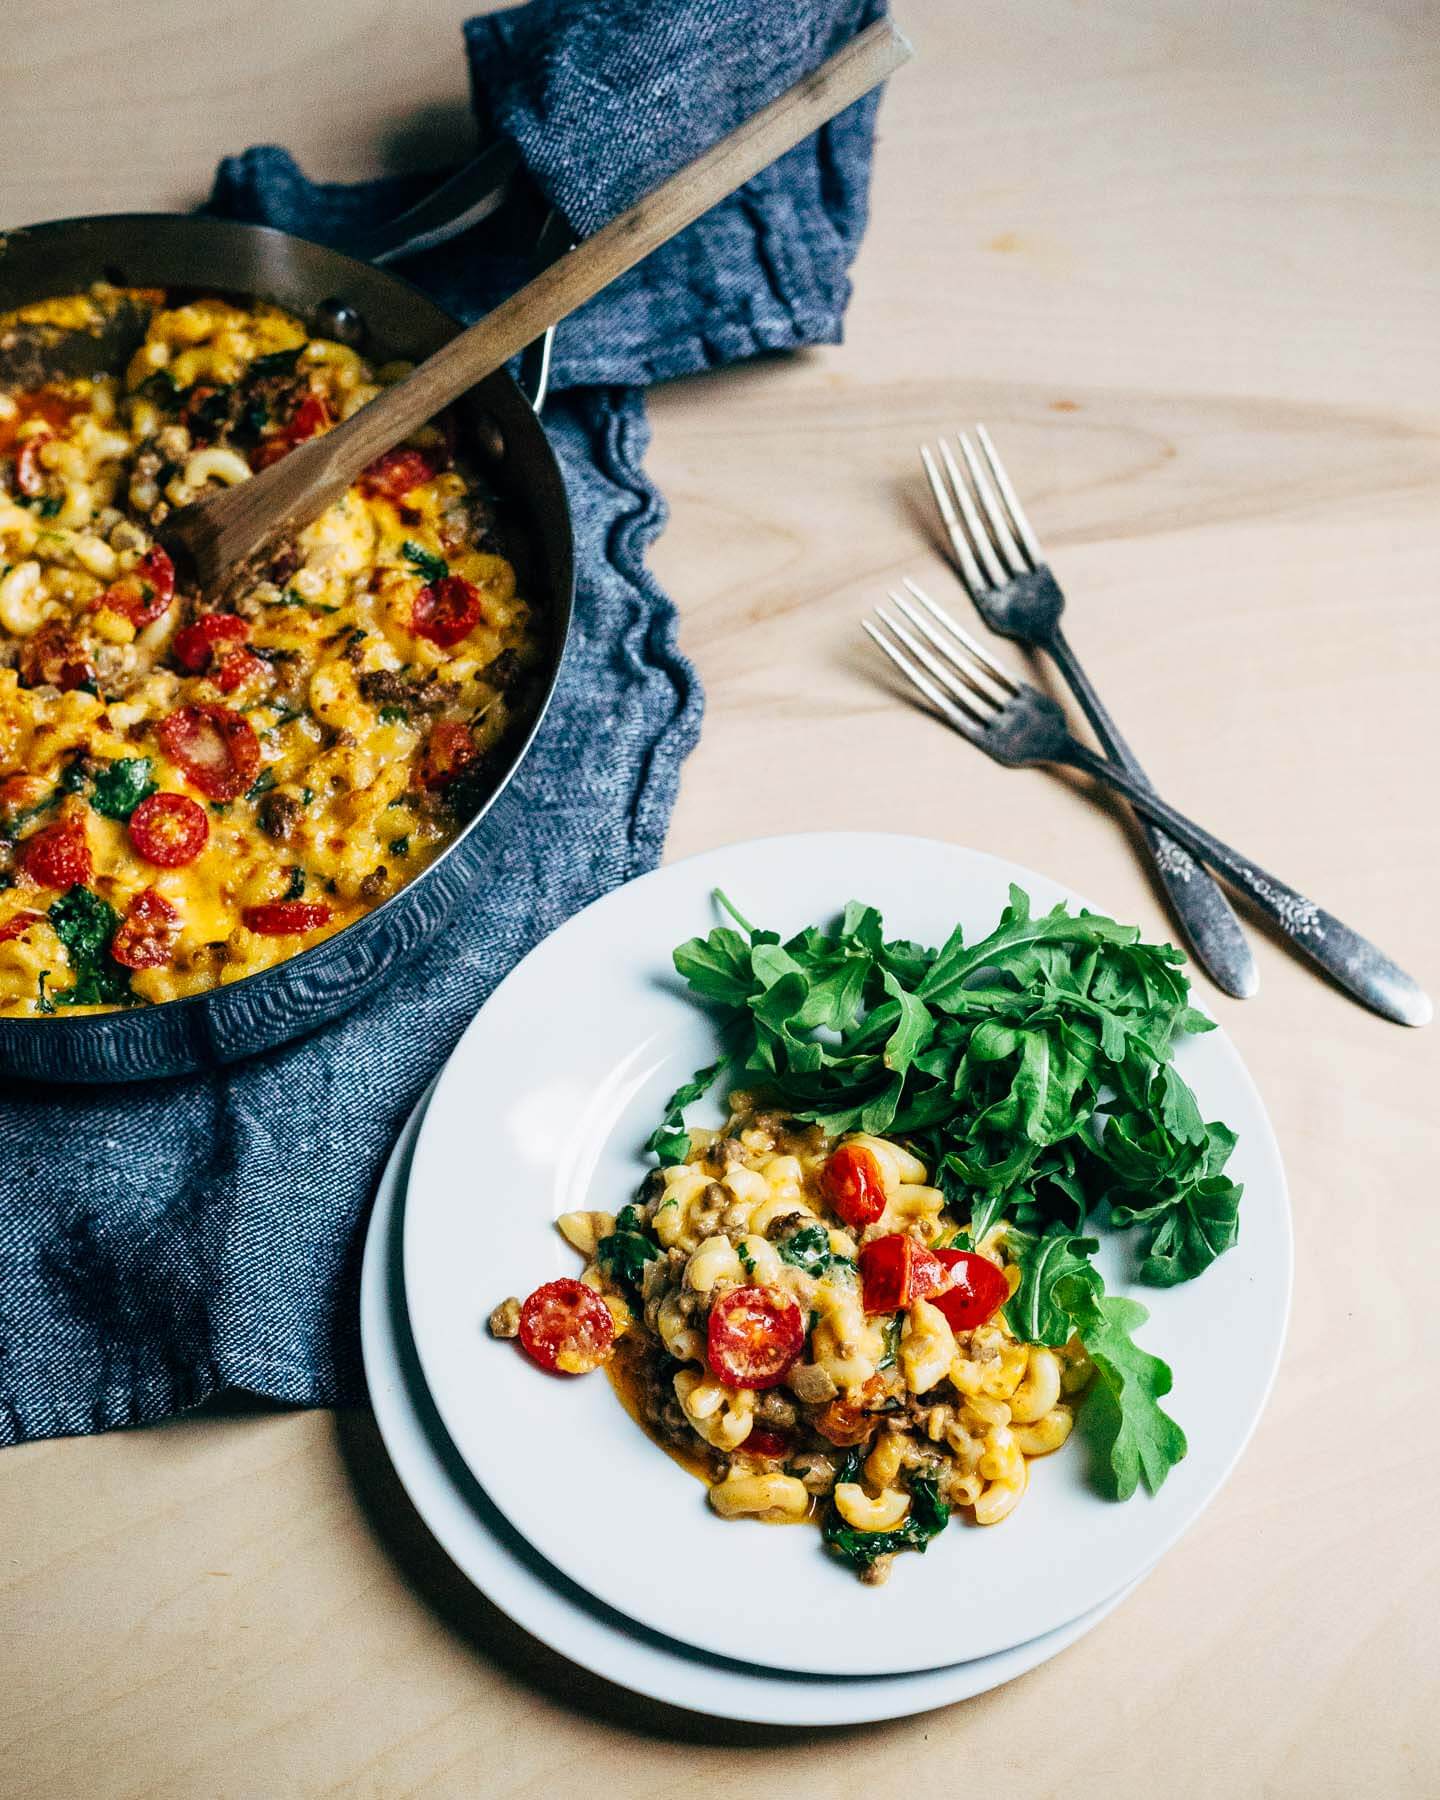 This flavorful cheeseburger mac and cheese is inspired by a classic summer cheeseburger. Sharp Wisconsin cheddar, tender macaroni, and perfectly browned hamburger are complemented by fresh bits of cherry tomato and arugula. 